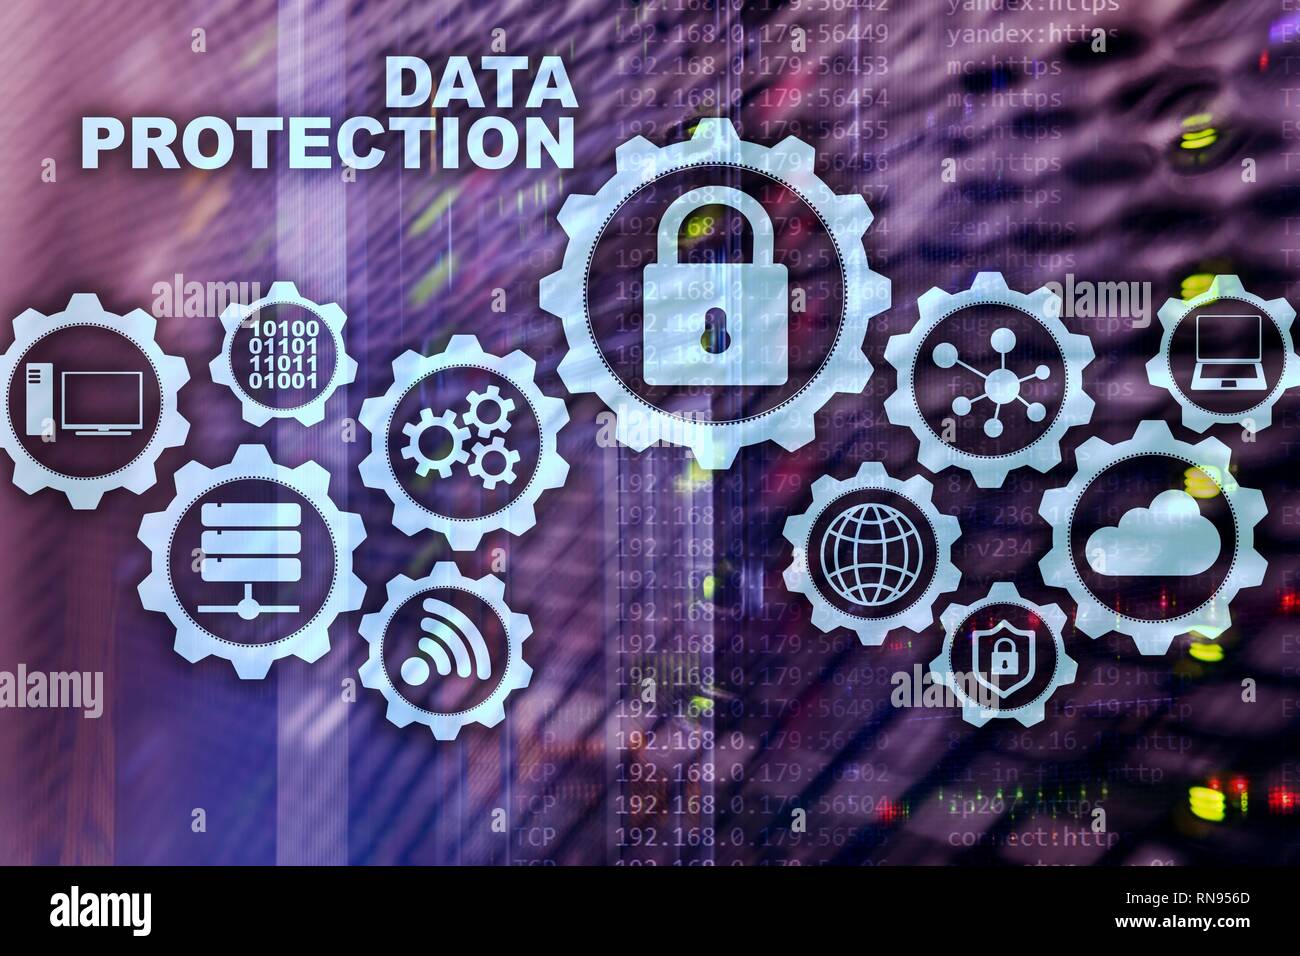 Server data protection concept. Safety of information from virus cyber digital internet technology. Stock Photo